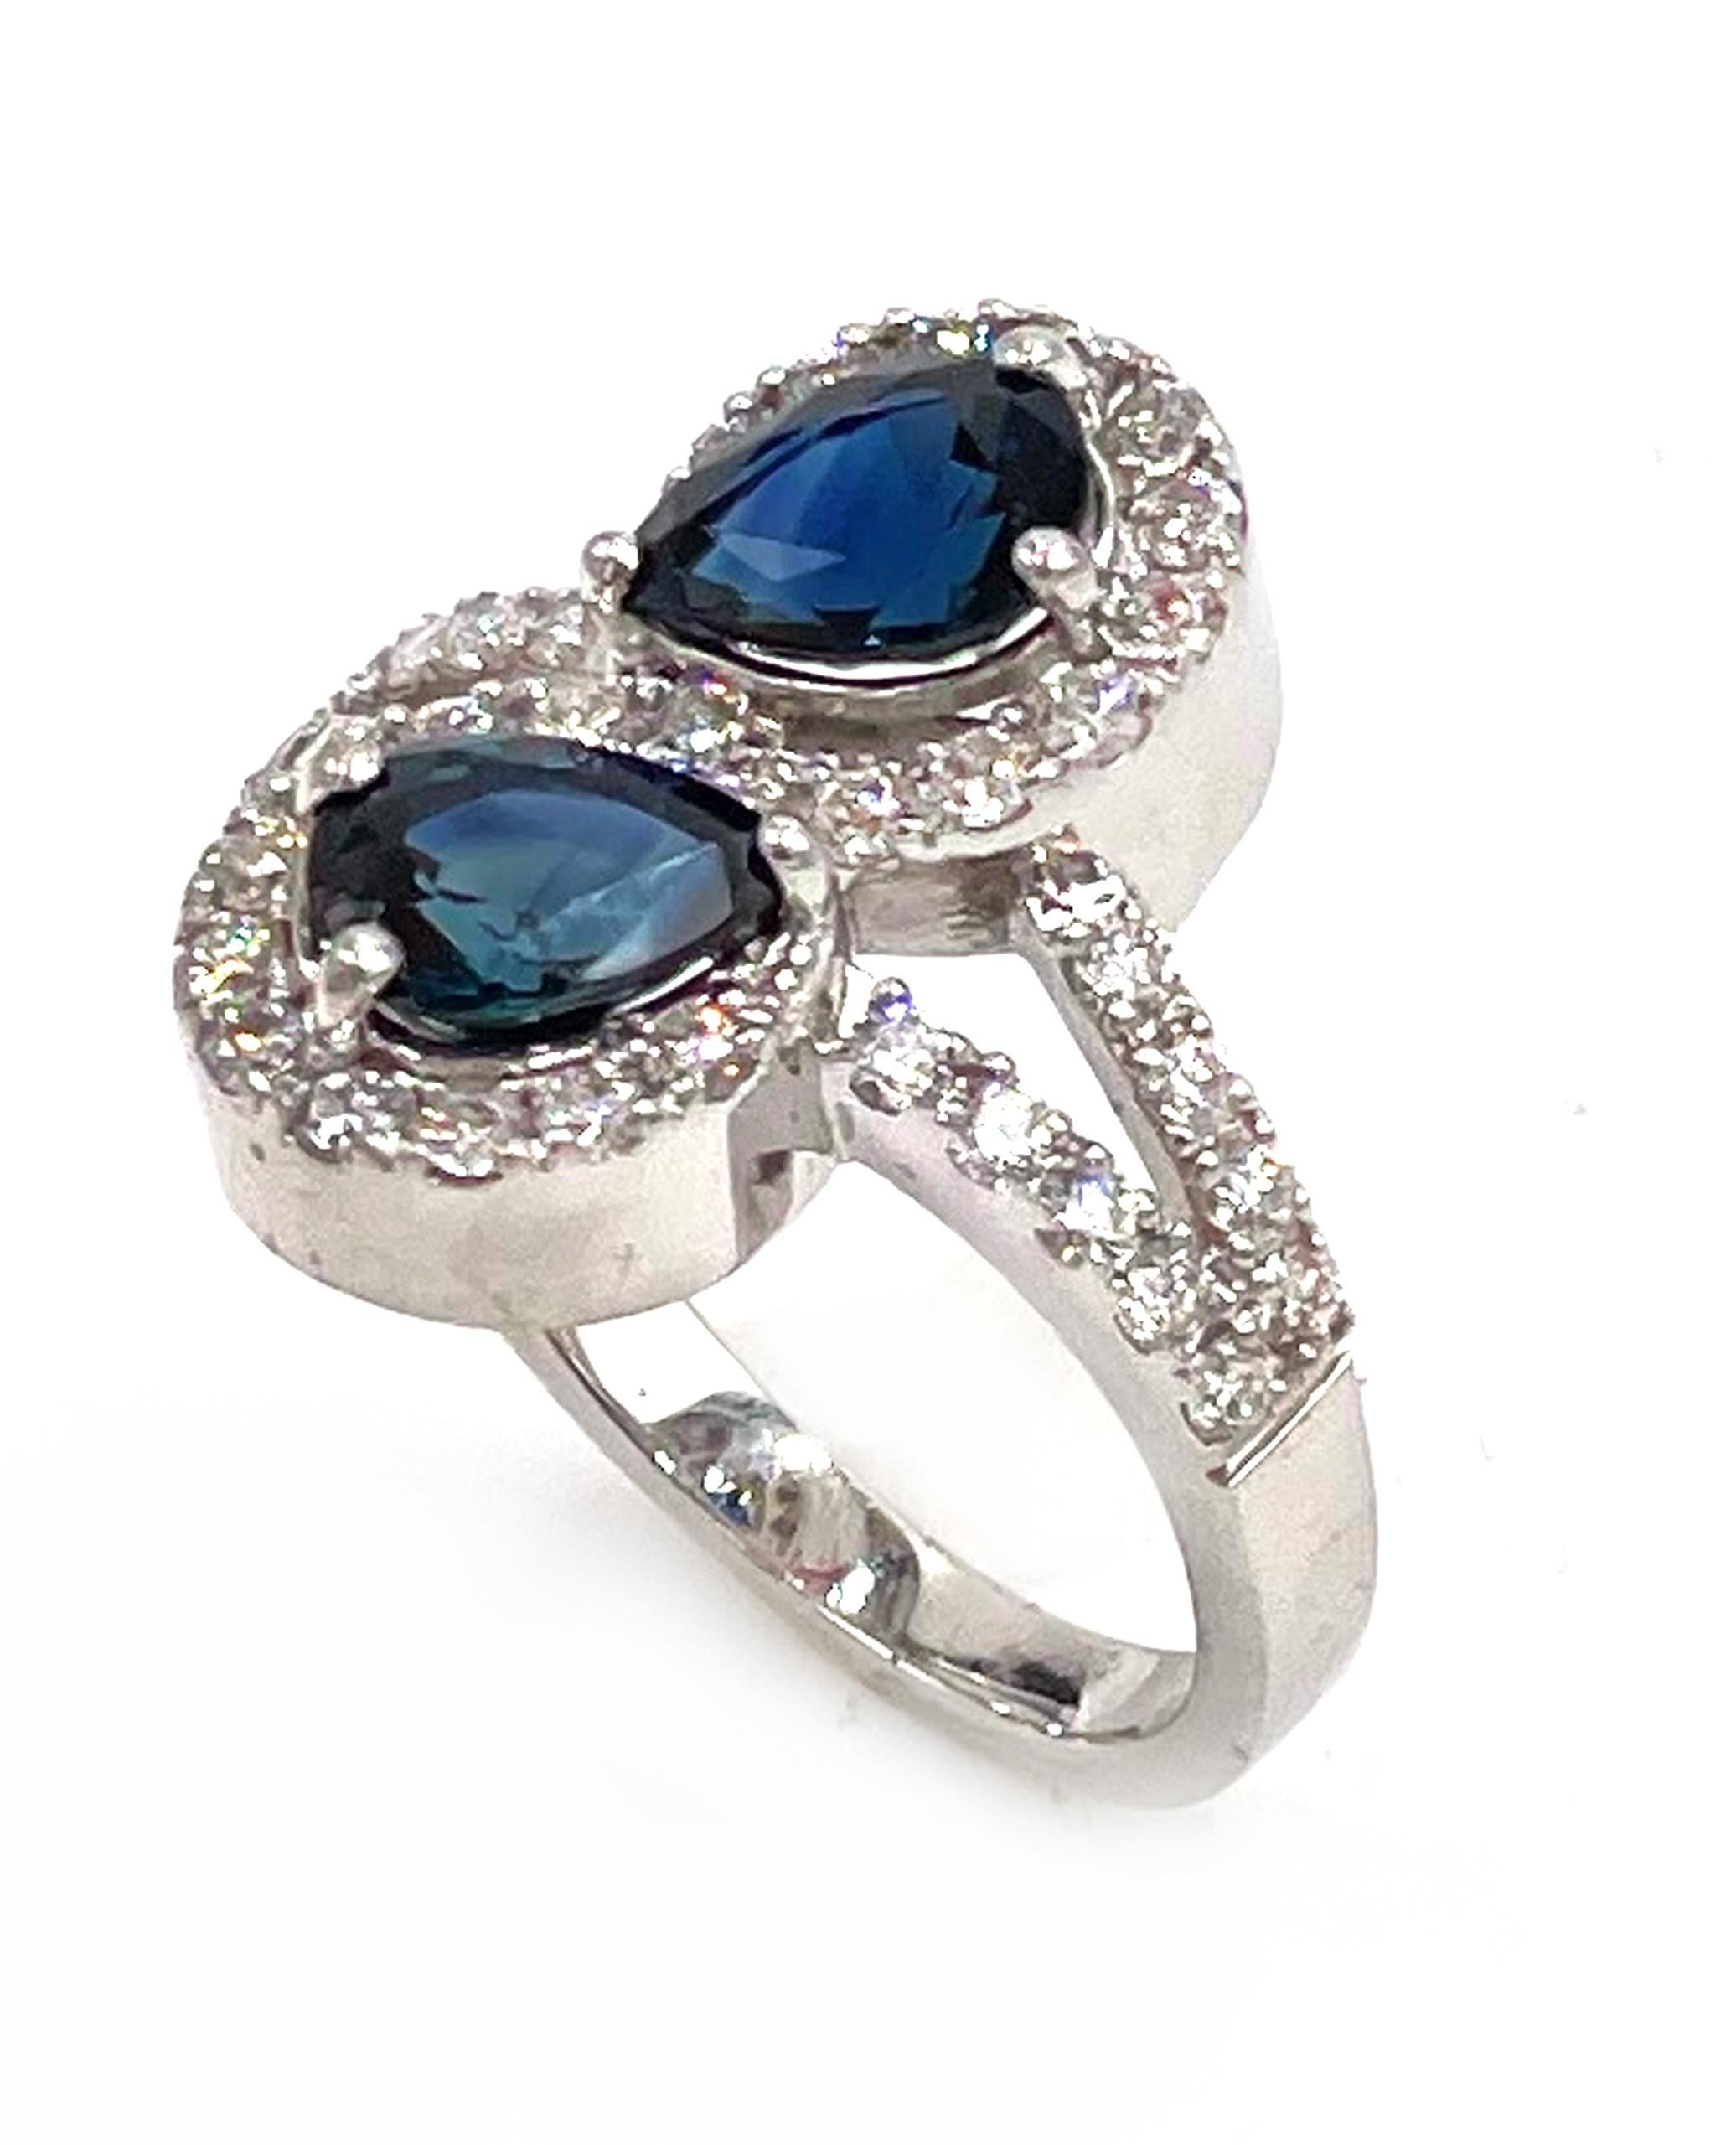 14K white gold split shank bypass ring featuring two pear shape blue sapphires 1.96 carats total weight.  The sapphires are haloed with round brilliant-cut diamonds. There are total of 40 round brilliant-cut diamonds weighing 0.65 carats.

*